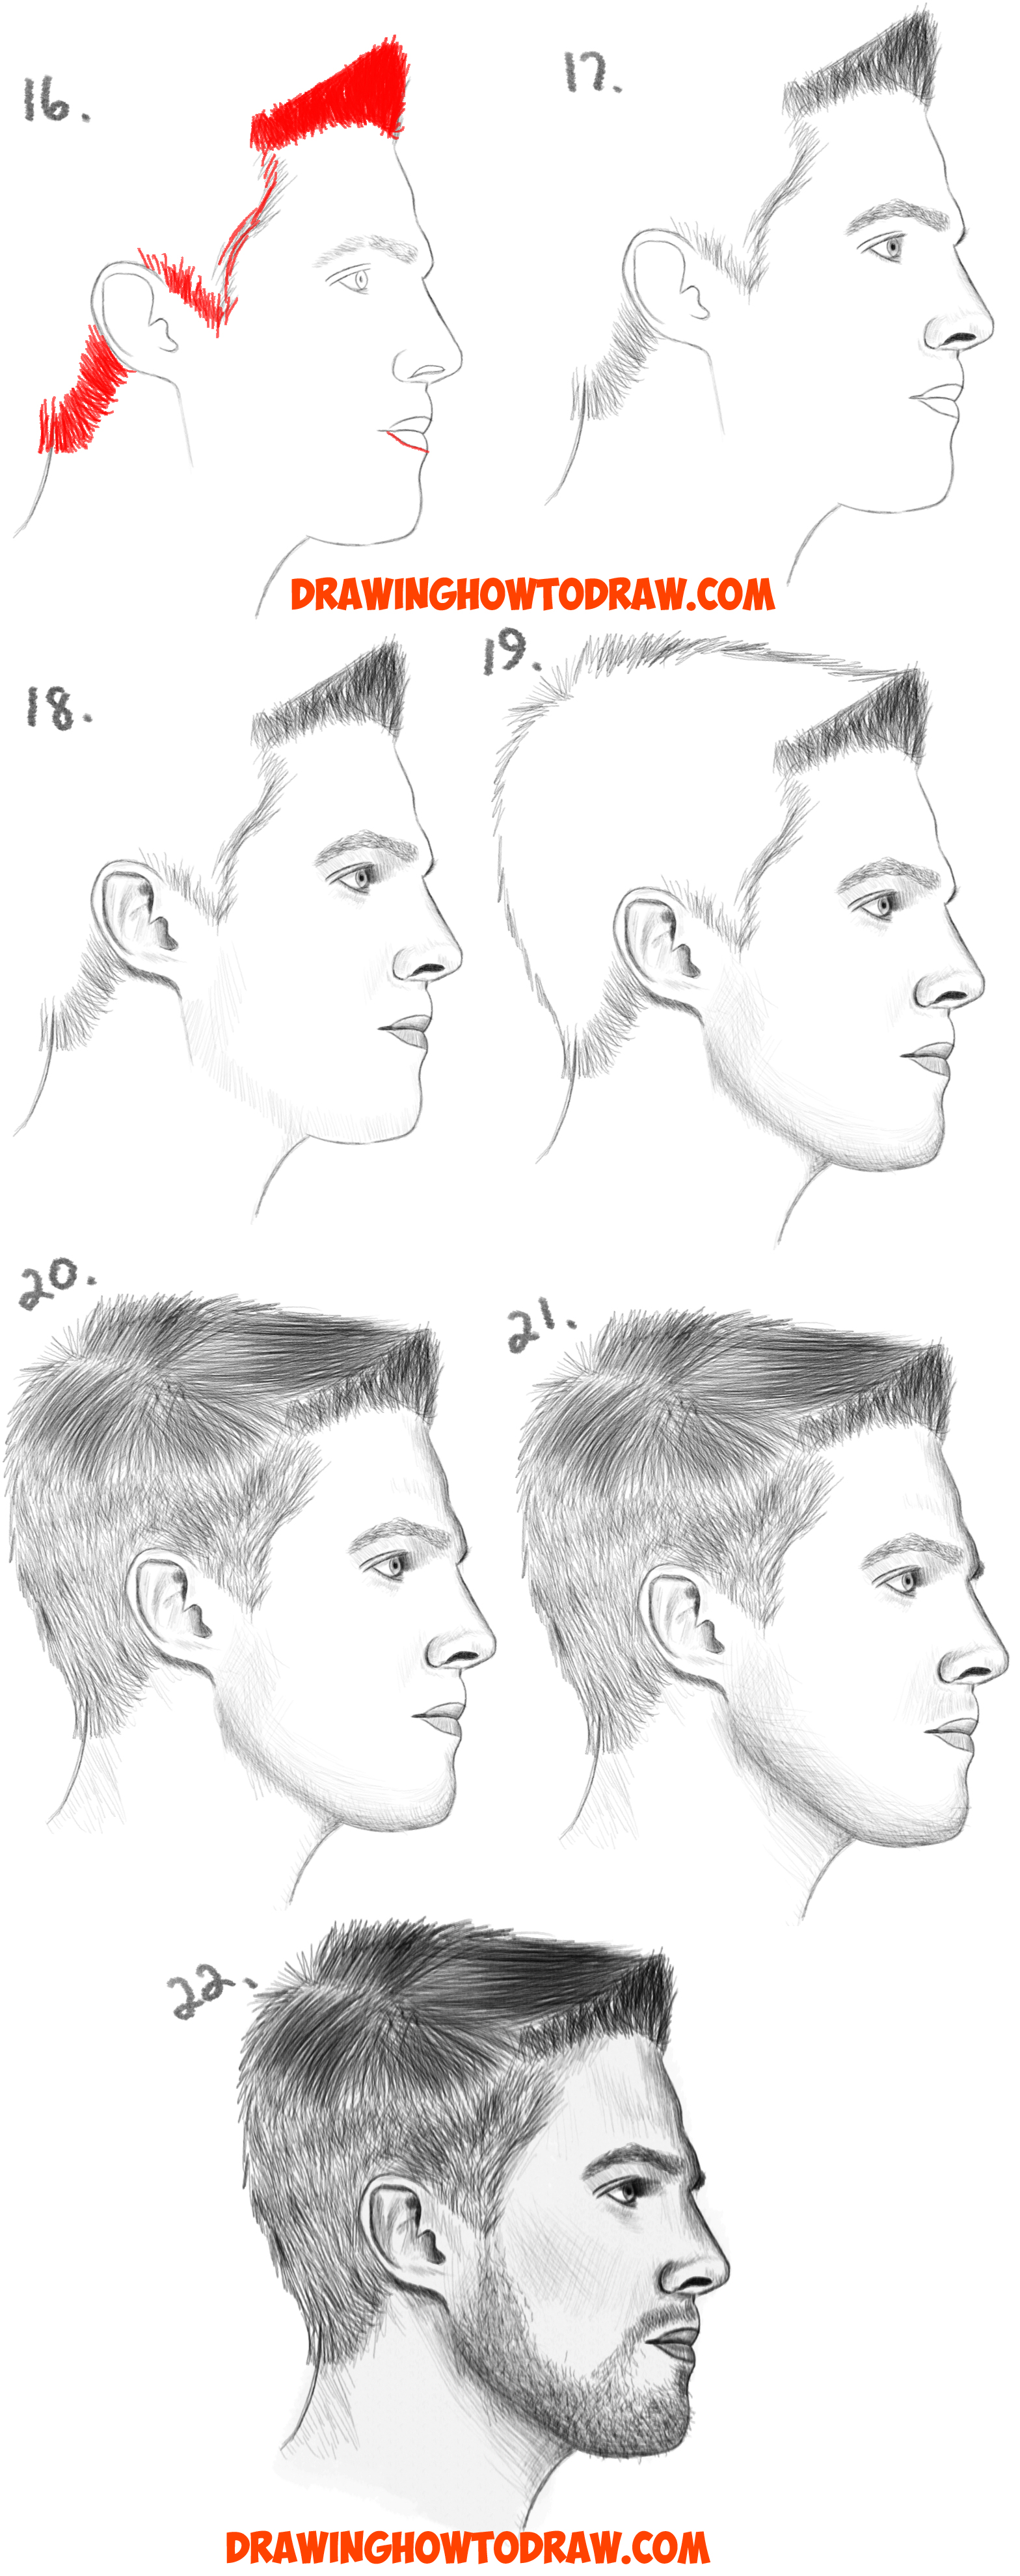 How To Draw A Face From The Side Profile View Male Man Easy Step By Step Drawing Tutorial For Beginners How To Draw Step By Step Drawing Tutorials For a realistic drawing, an ideal male head often has a well pronounced jaw compared to females. easy step by step drawing tutorial